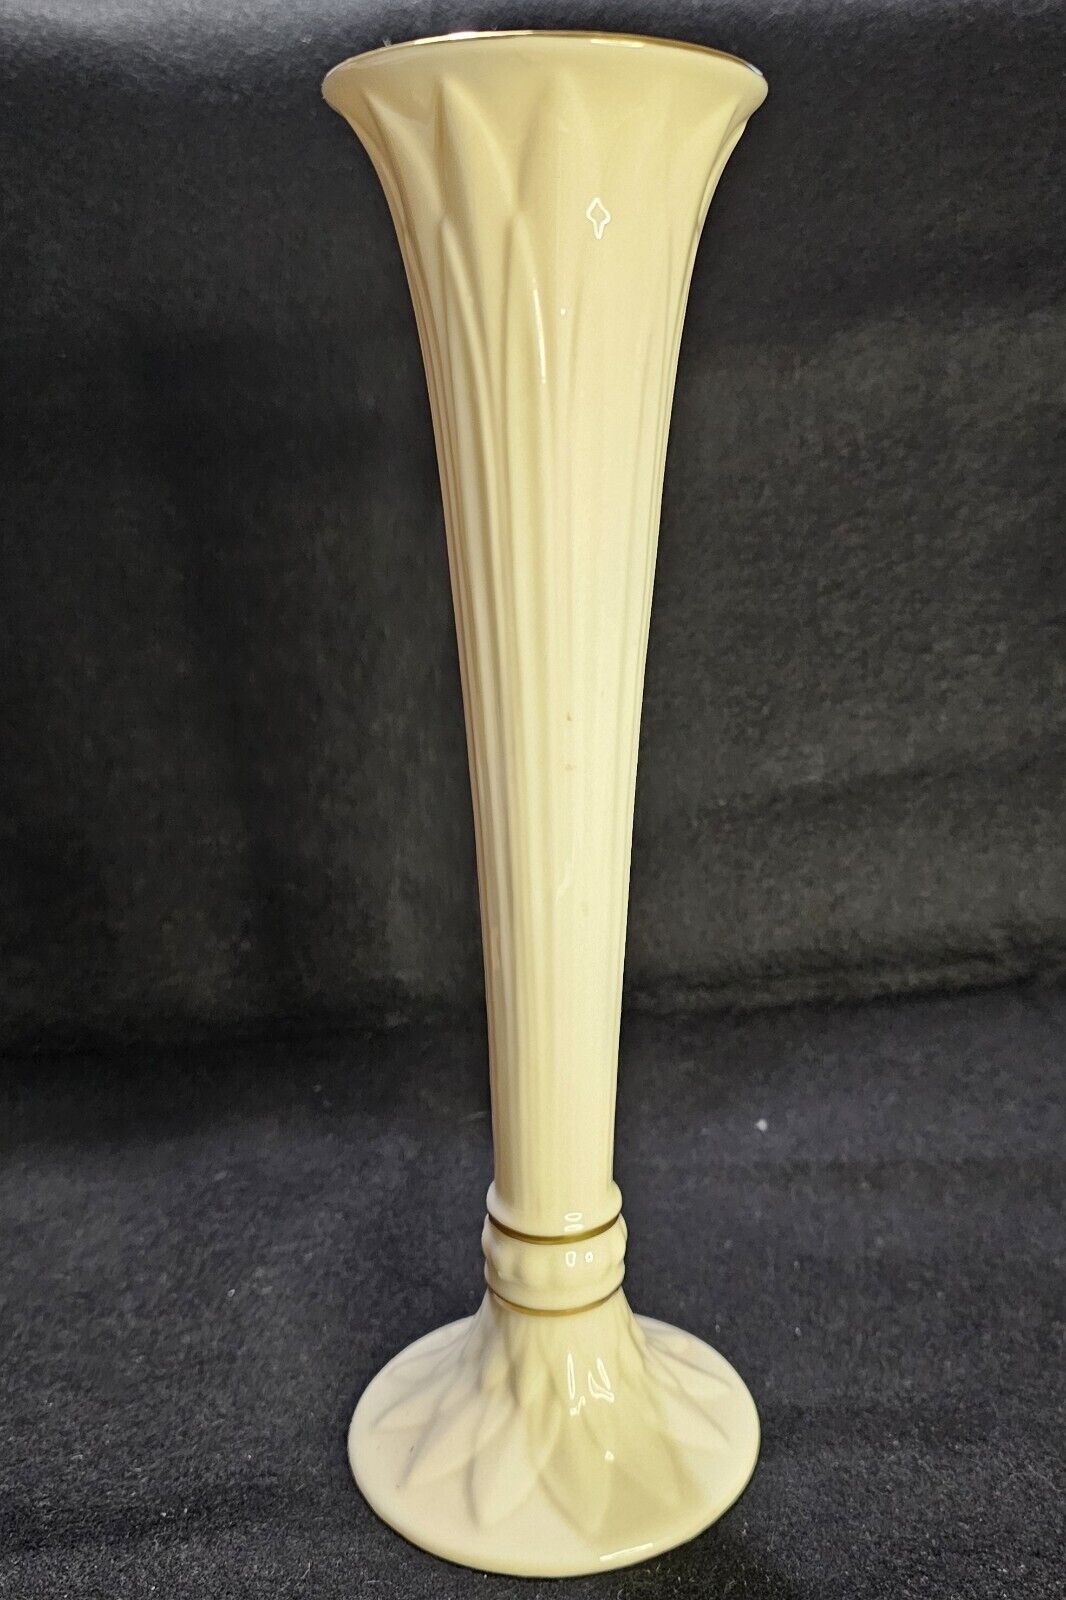 LENOX Tall Bud Vase Ivory Porcelain Hand Decorated with 24k Gold Trim 9\